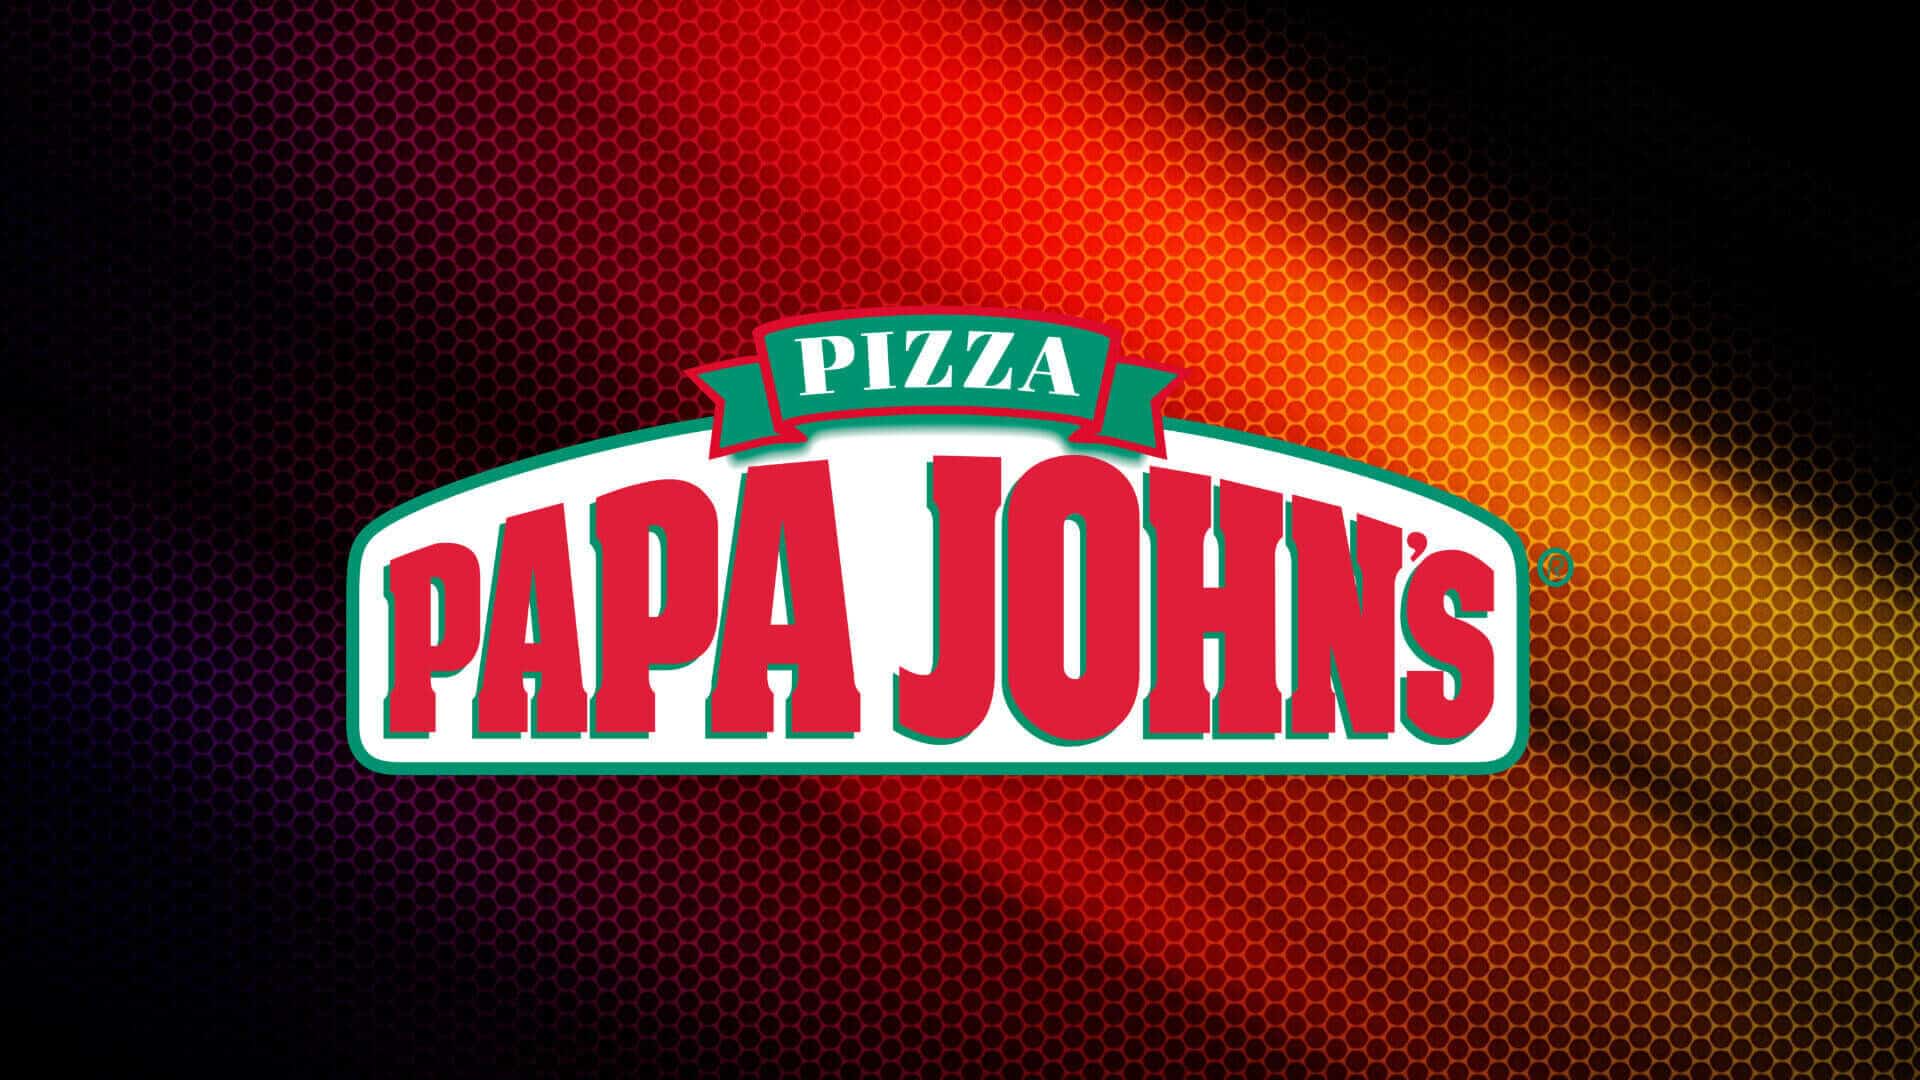 Free Papa Johns Pizza Coupon Code - How to get Free Papa Johns Pizza